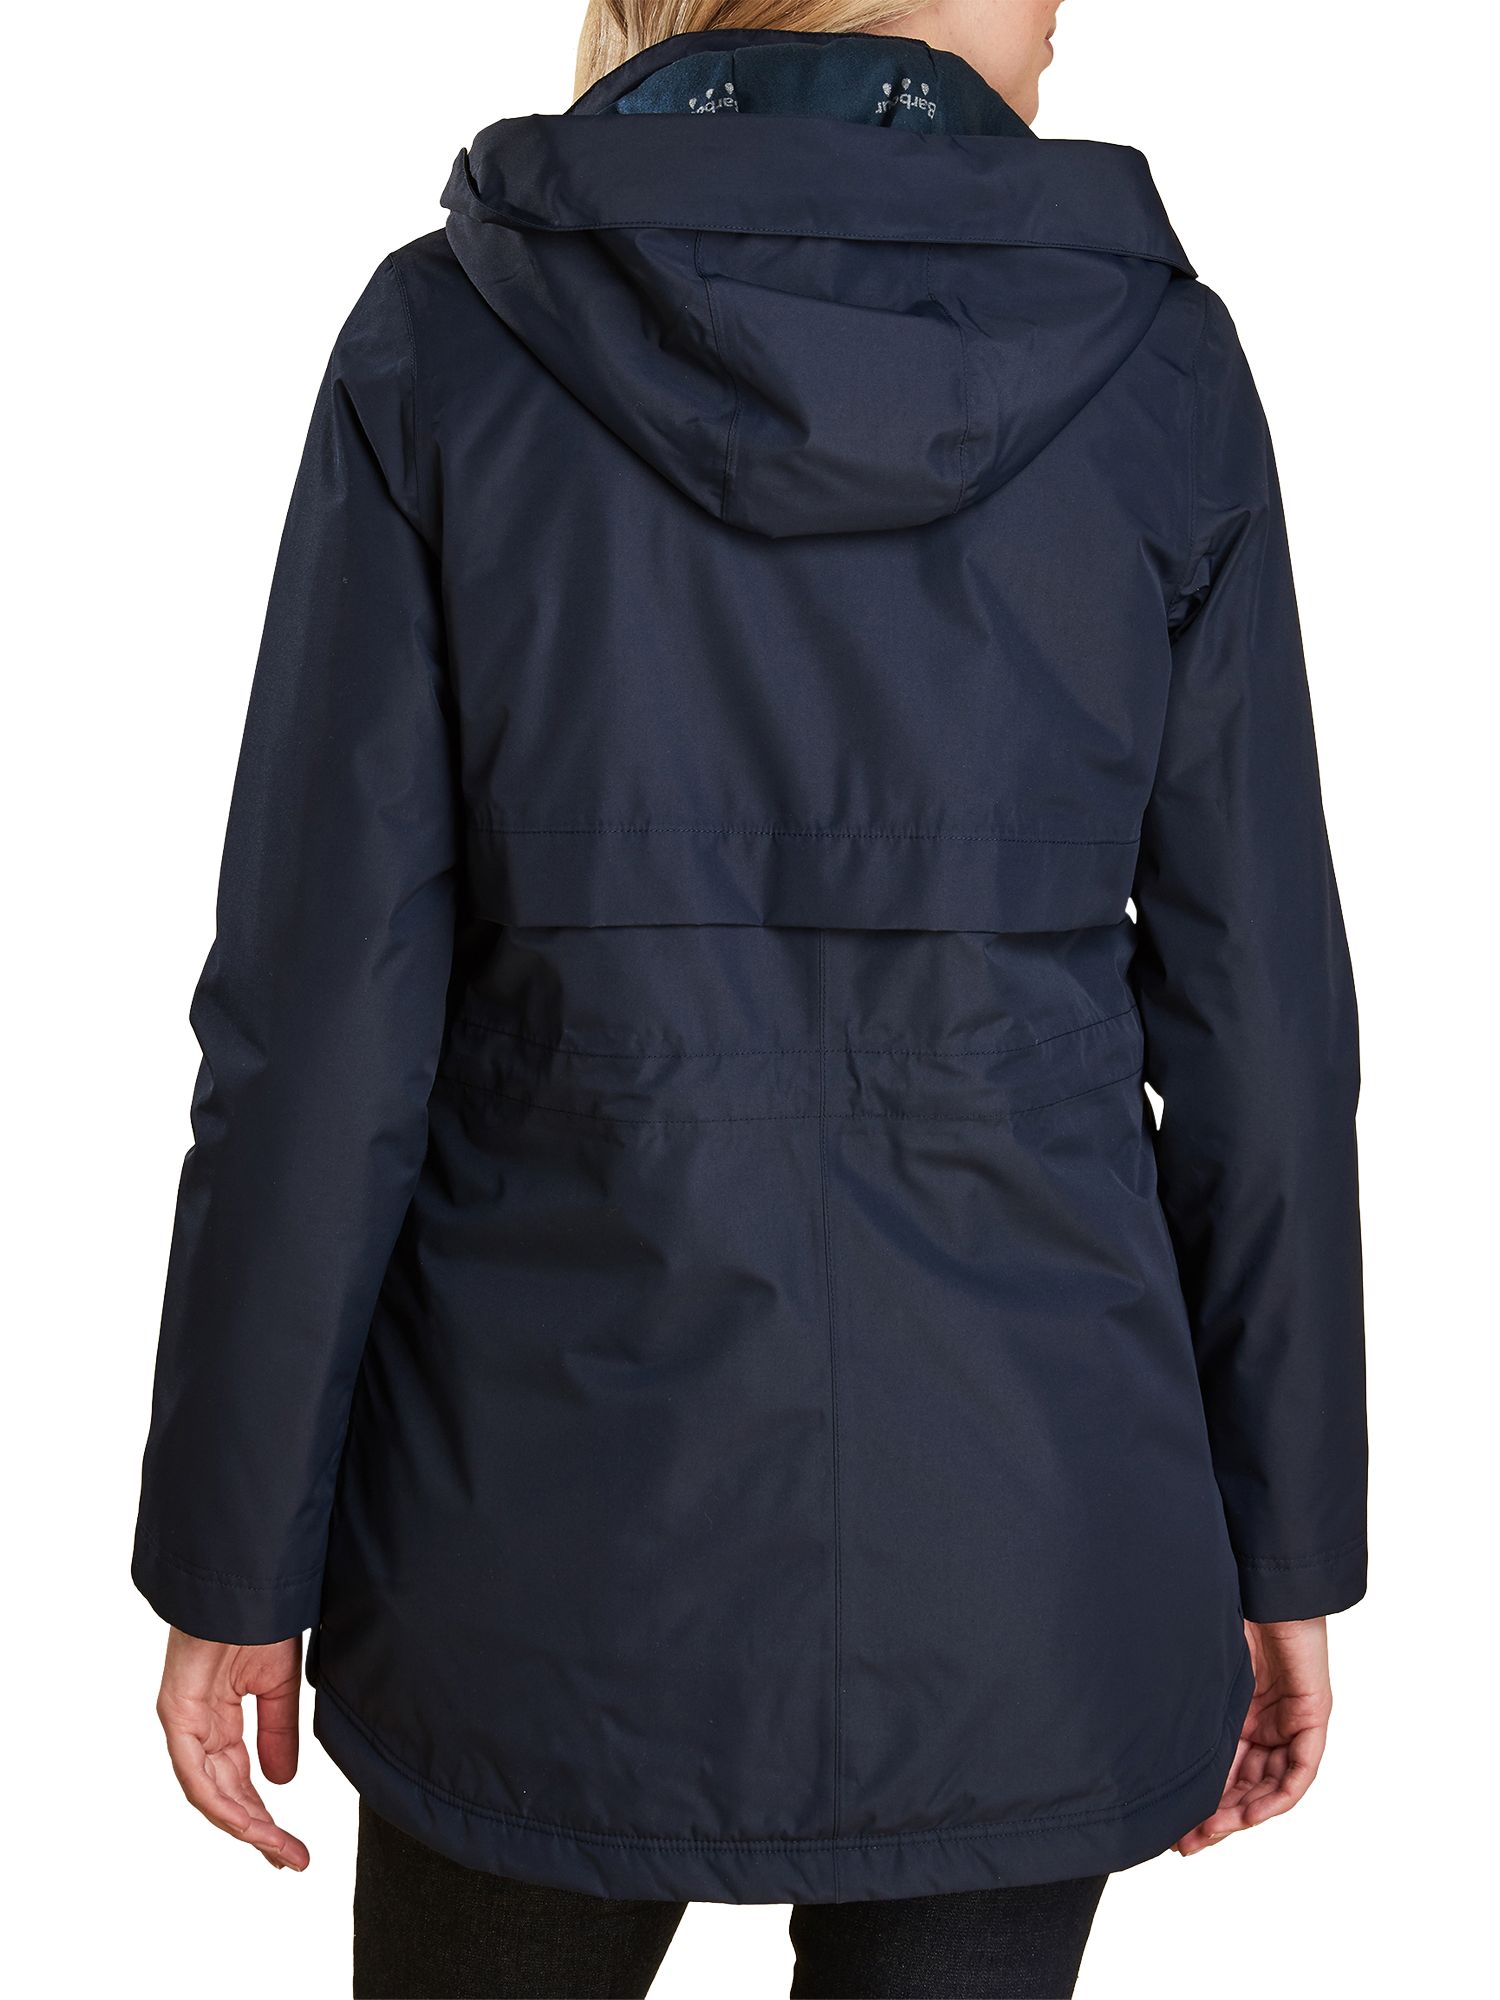 barbour altair